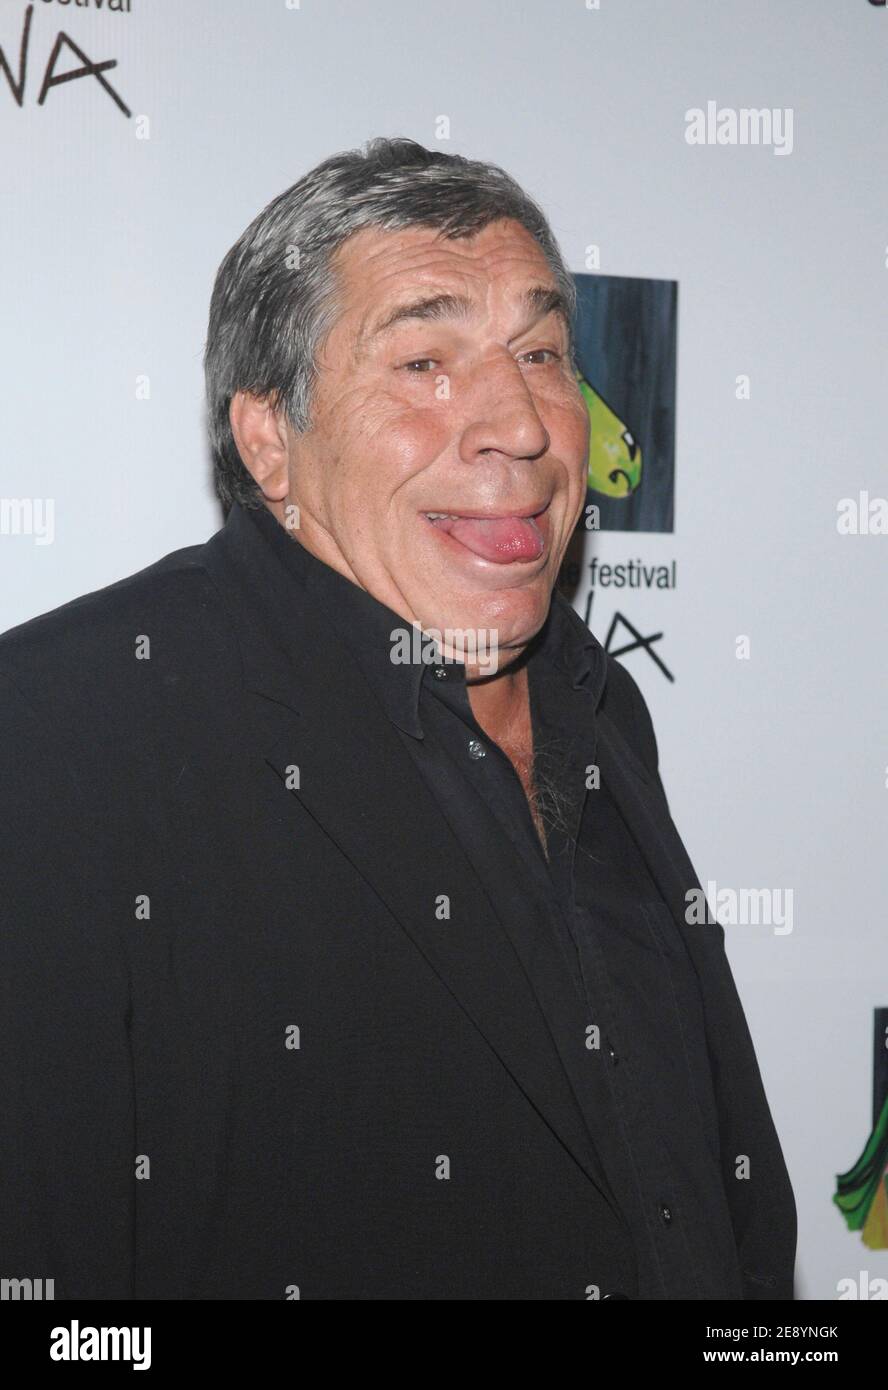 Jean-Pierre Castaldi arrives to the gala dinner of the 14th annual Epona  Festival in Cabourg, France, on October 13, 2007. Photo by Nicolas  Khayat/ABACAPRESS.COM Stock Photo - Alamy